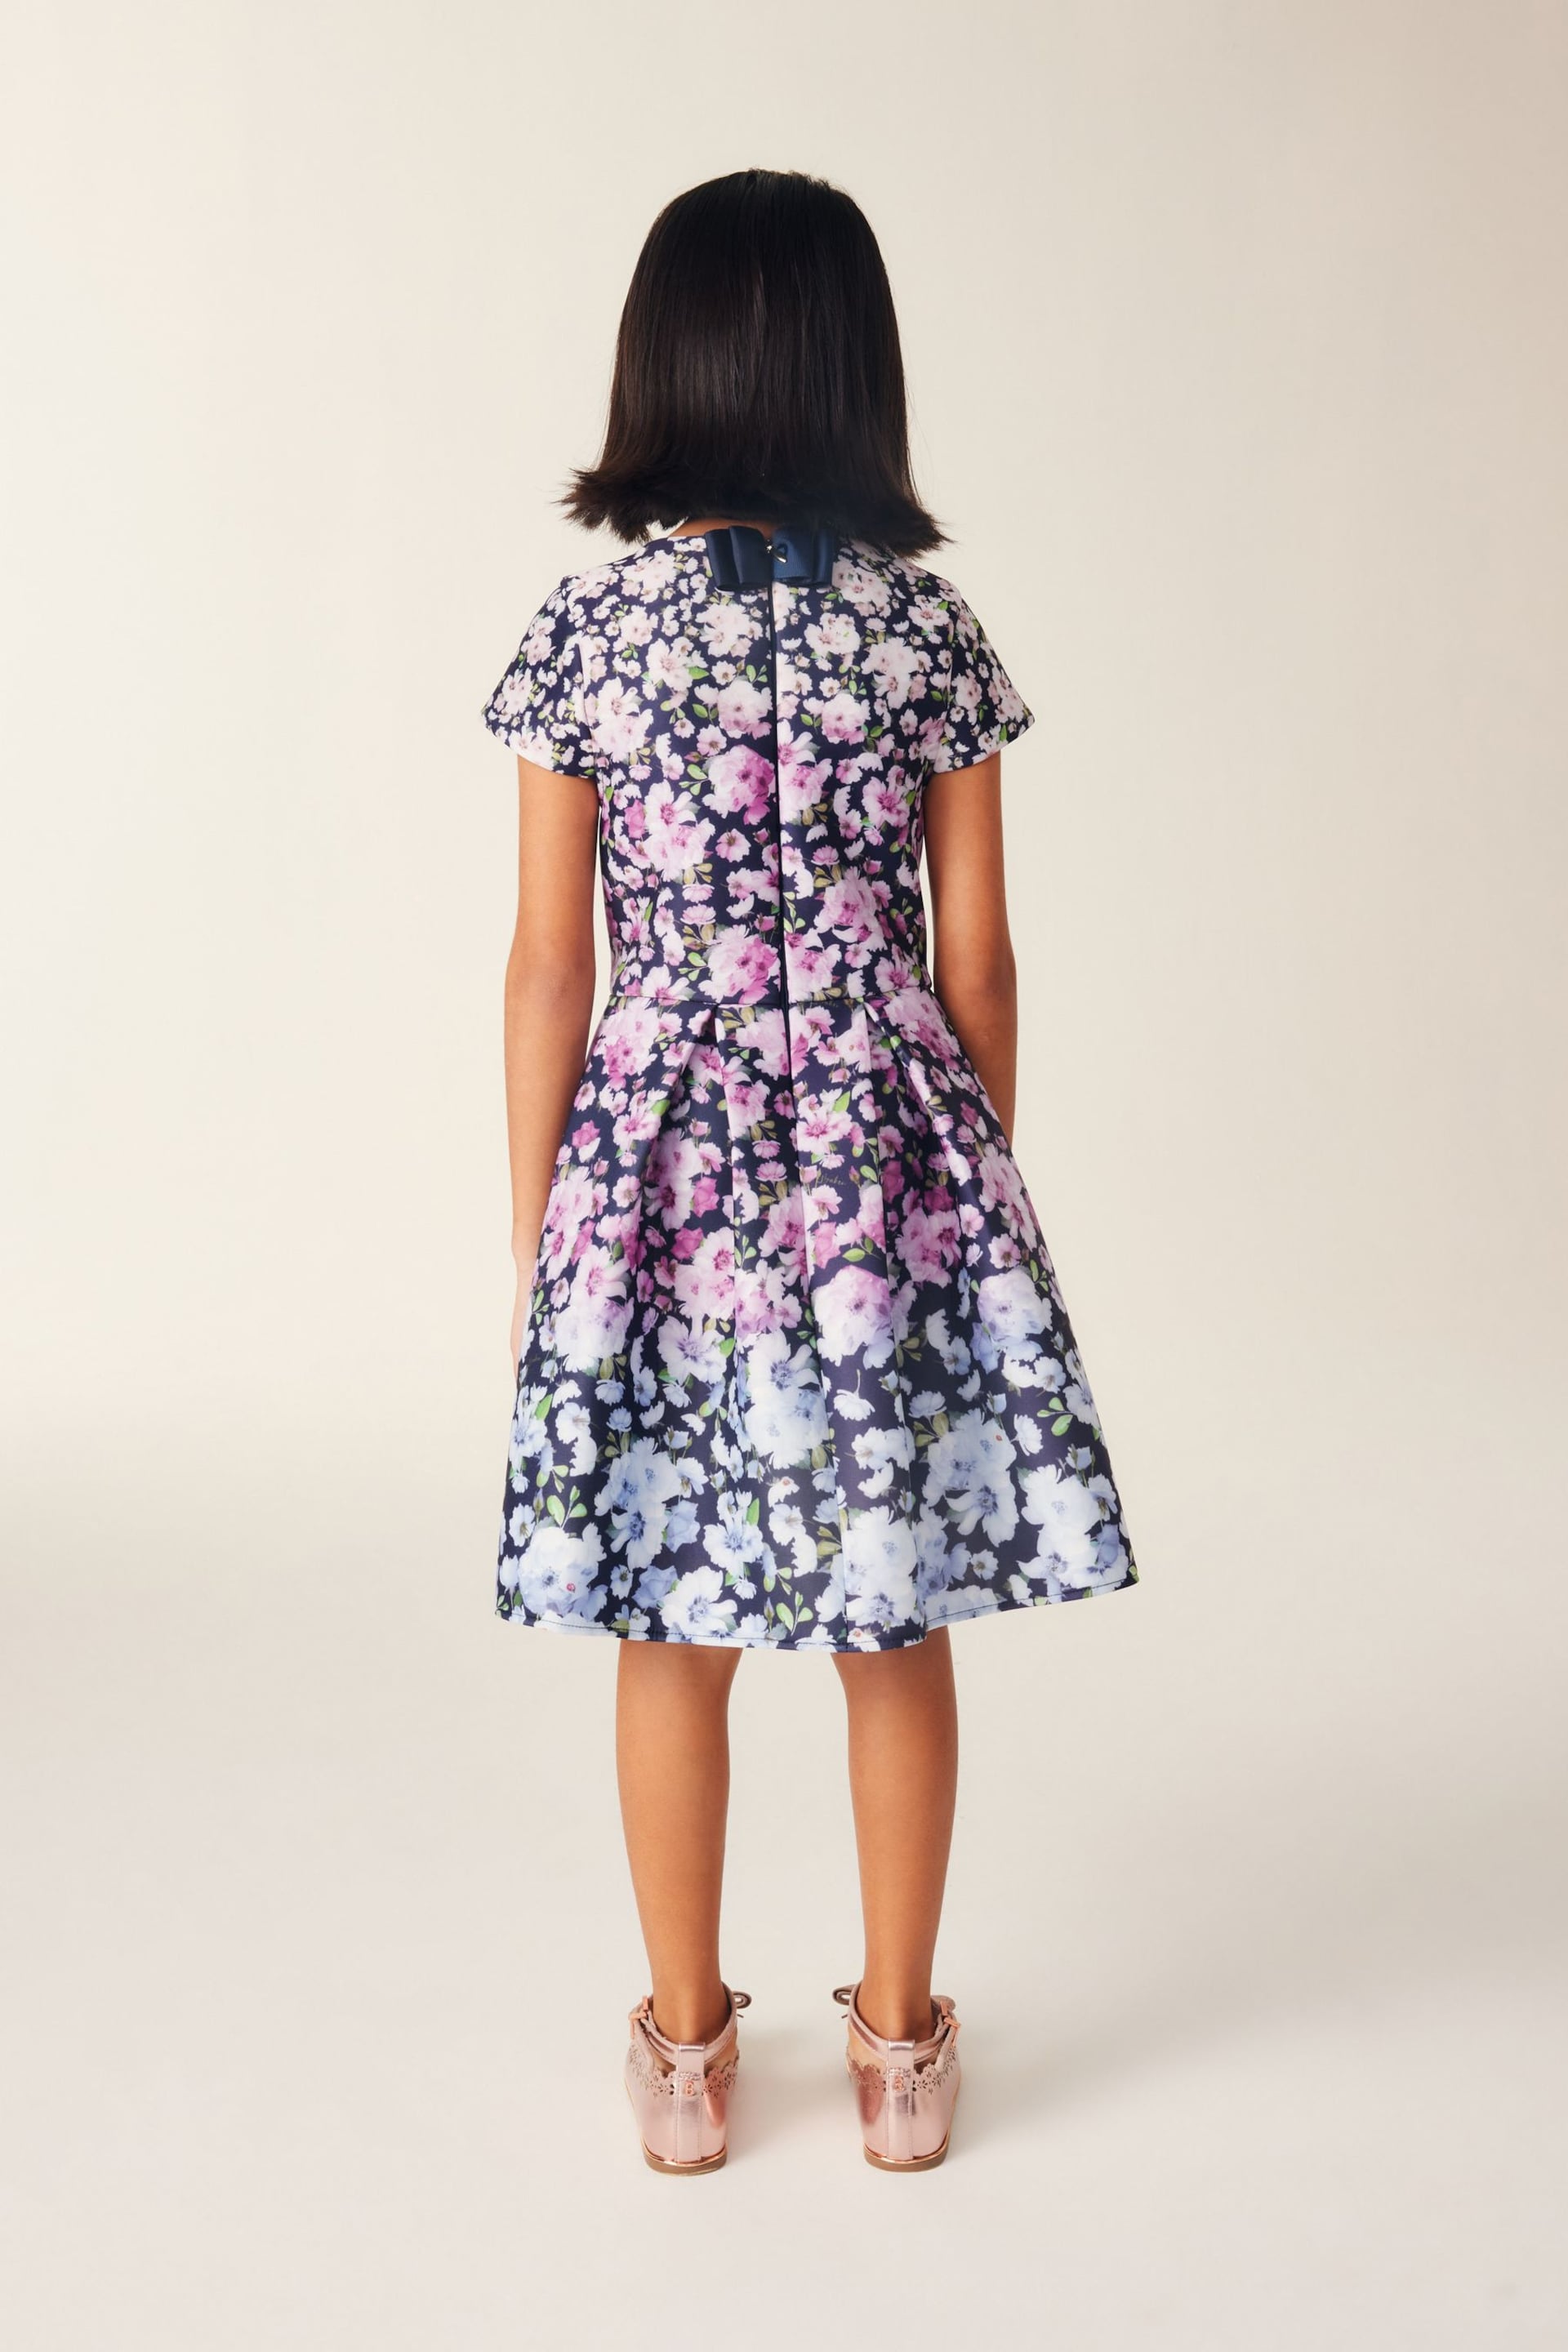 Baker by Ted Baker Multi-Coloured Floral Scuba Dress - Image 2 of 11